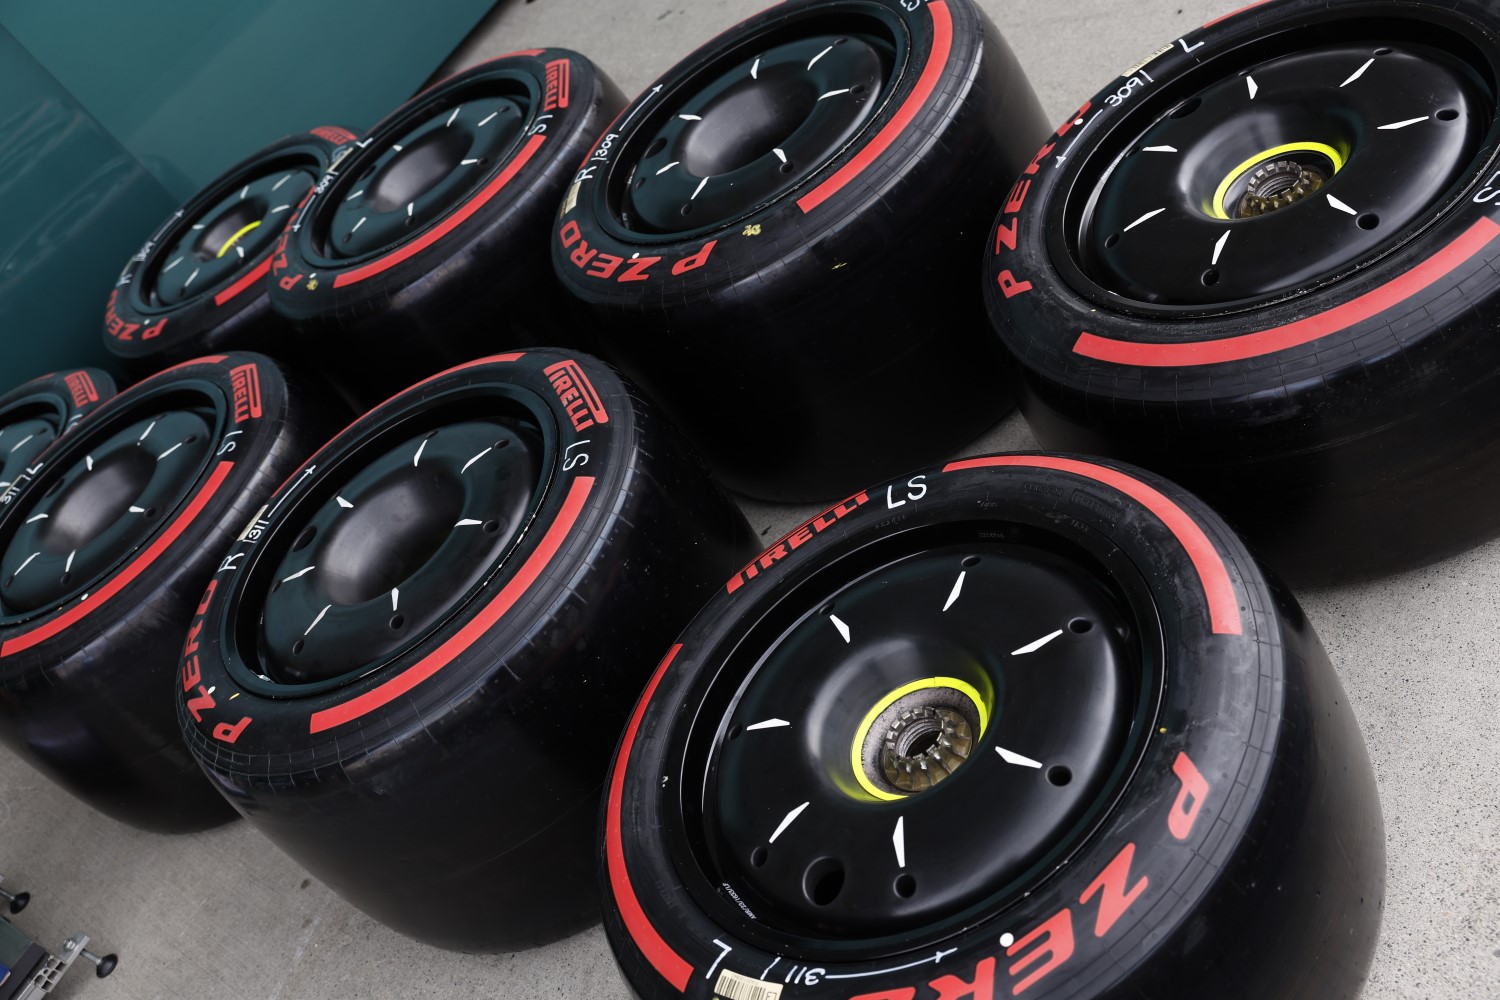 Pirelli tires during the Japanese GP at Suzuka on Thursday September 21, 2023 in Suzuka, Japan. (Photo by Steven Tee / LAT Images)